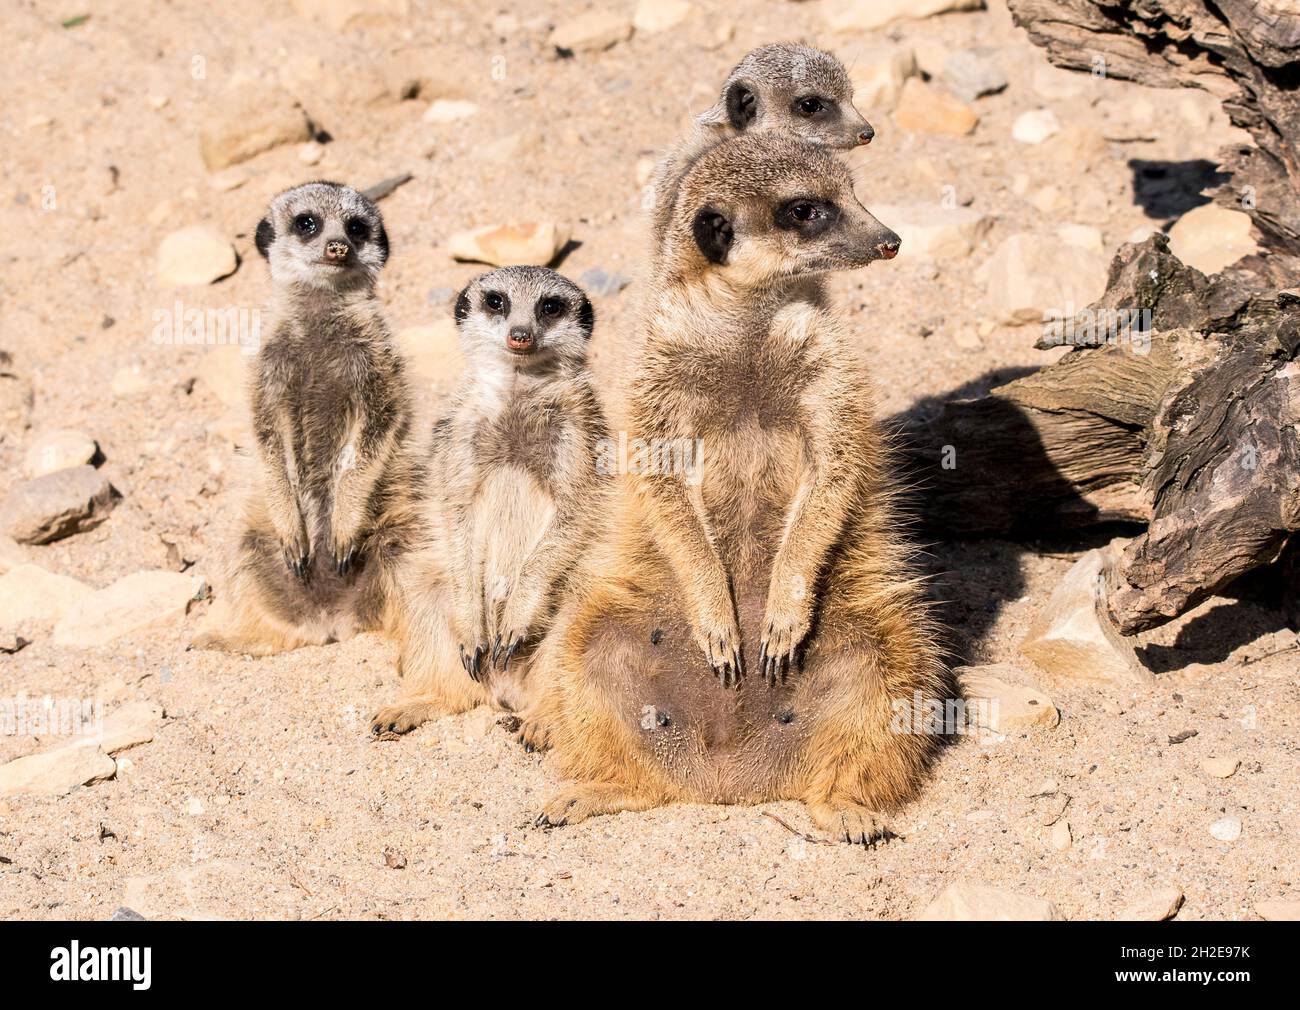 mother and children suricate standing up and looking alert Stock Photo